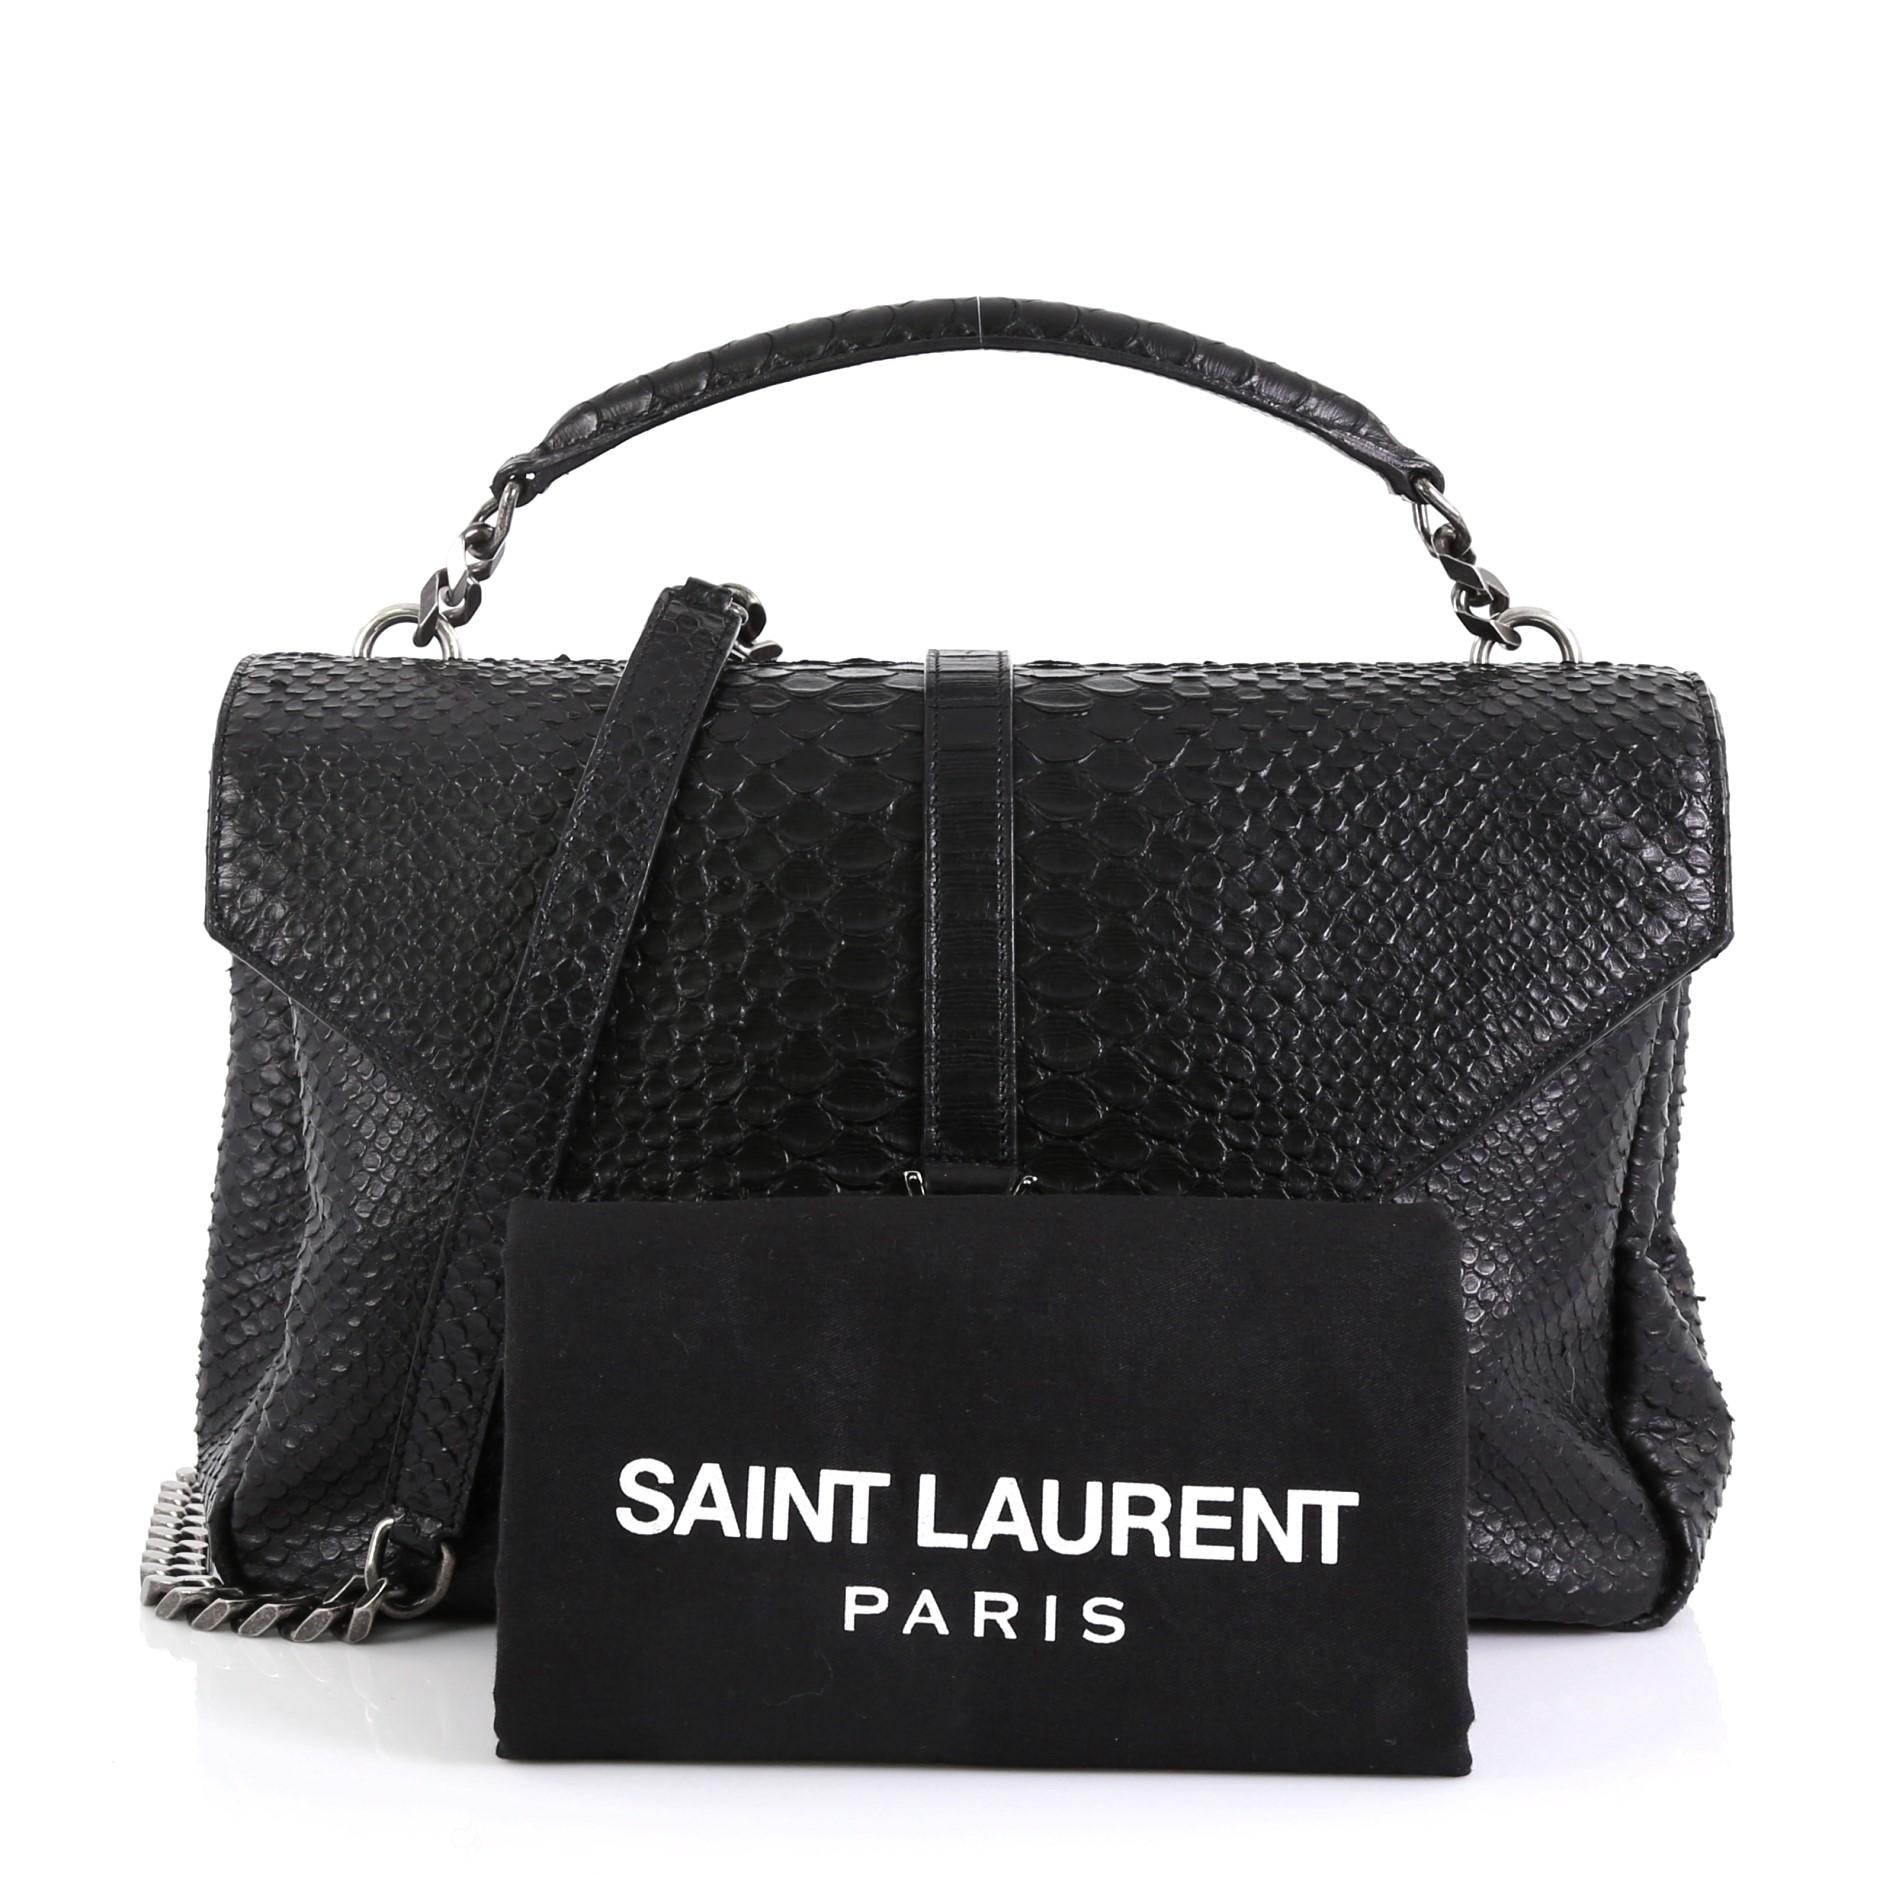 This Saint Laurent Classic Monogram College Bag Python Embossed Leather Large, crafted in black python embossed leather, features a single top handle, exterior back pocket, and aged silver-tone hardware. Its magnetic snap closure opens to a black